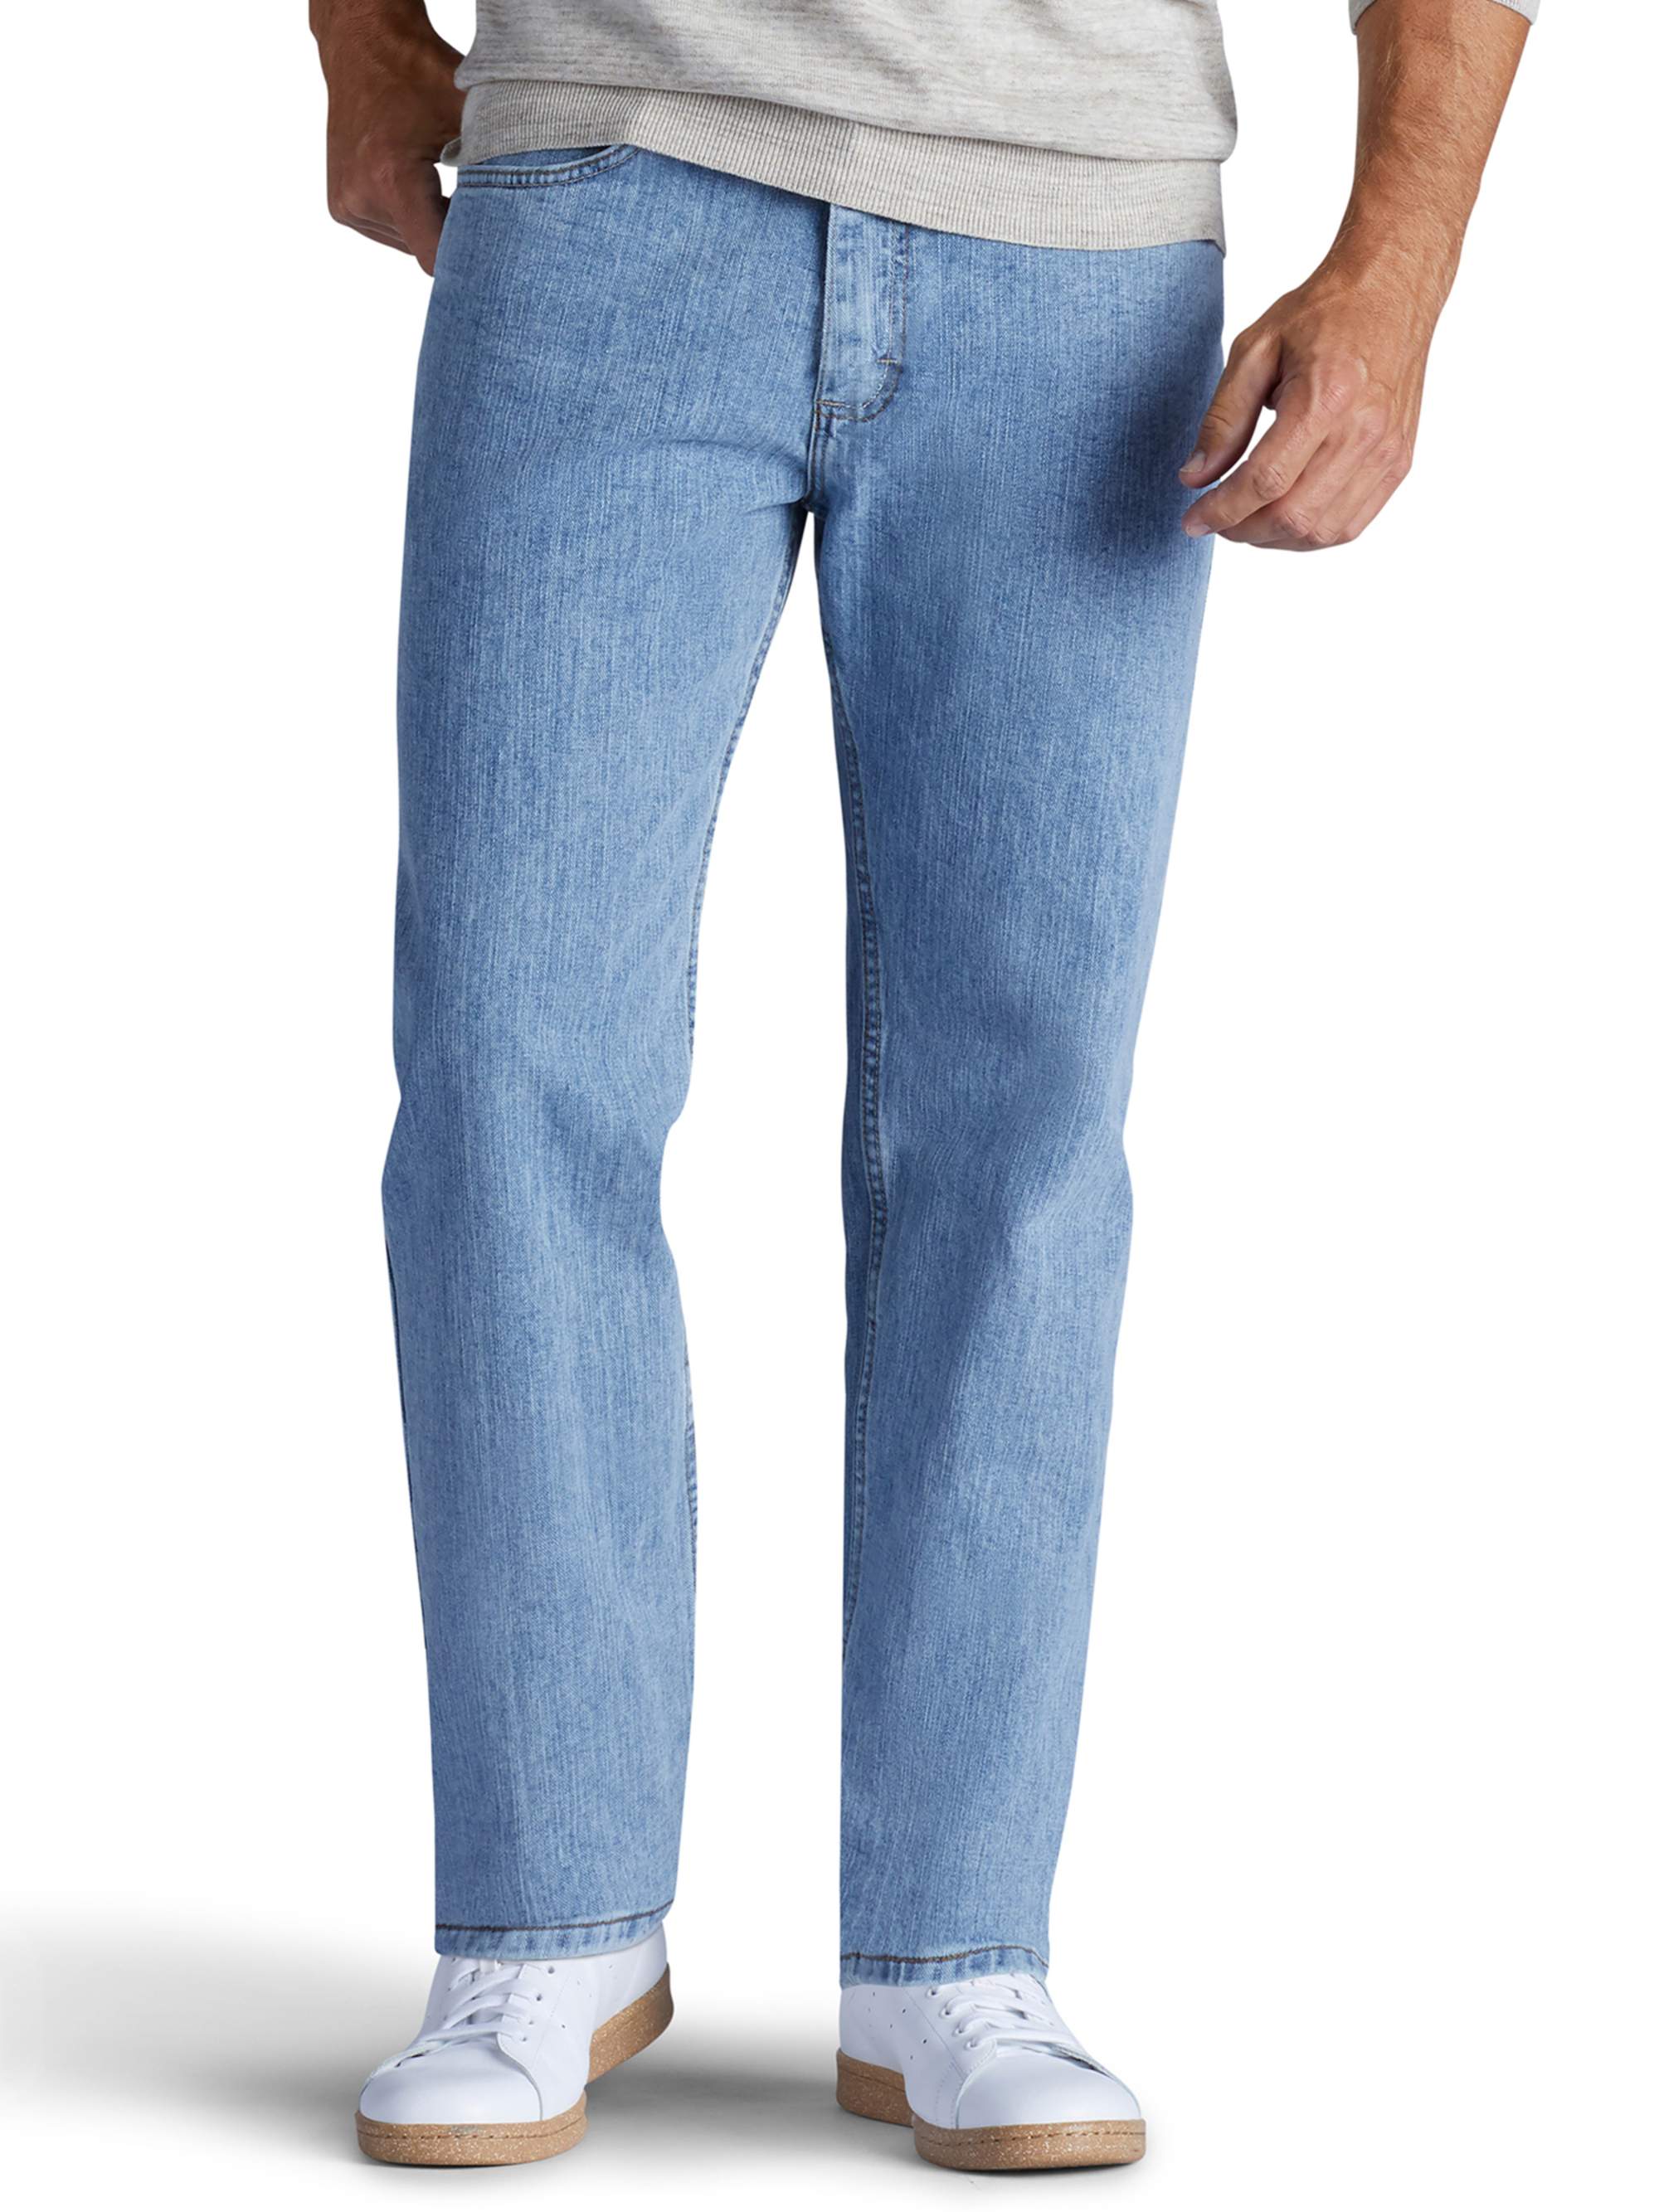 Lee Men's Relaxed Fit Straight Leg Jeans - image 1 of 5